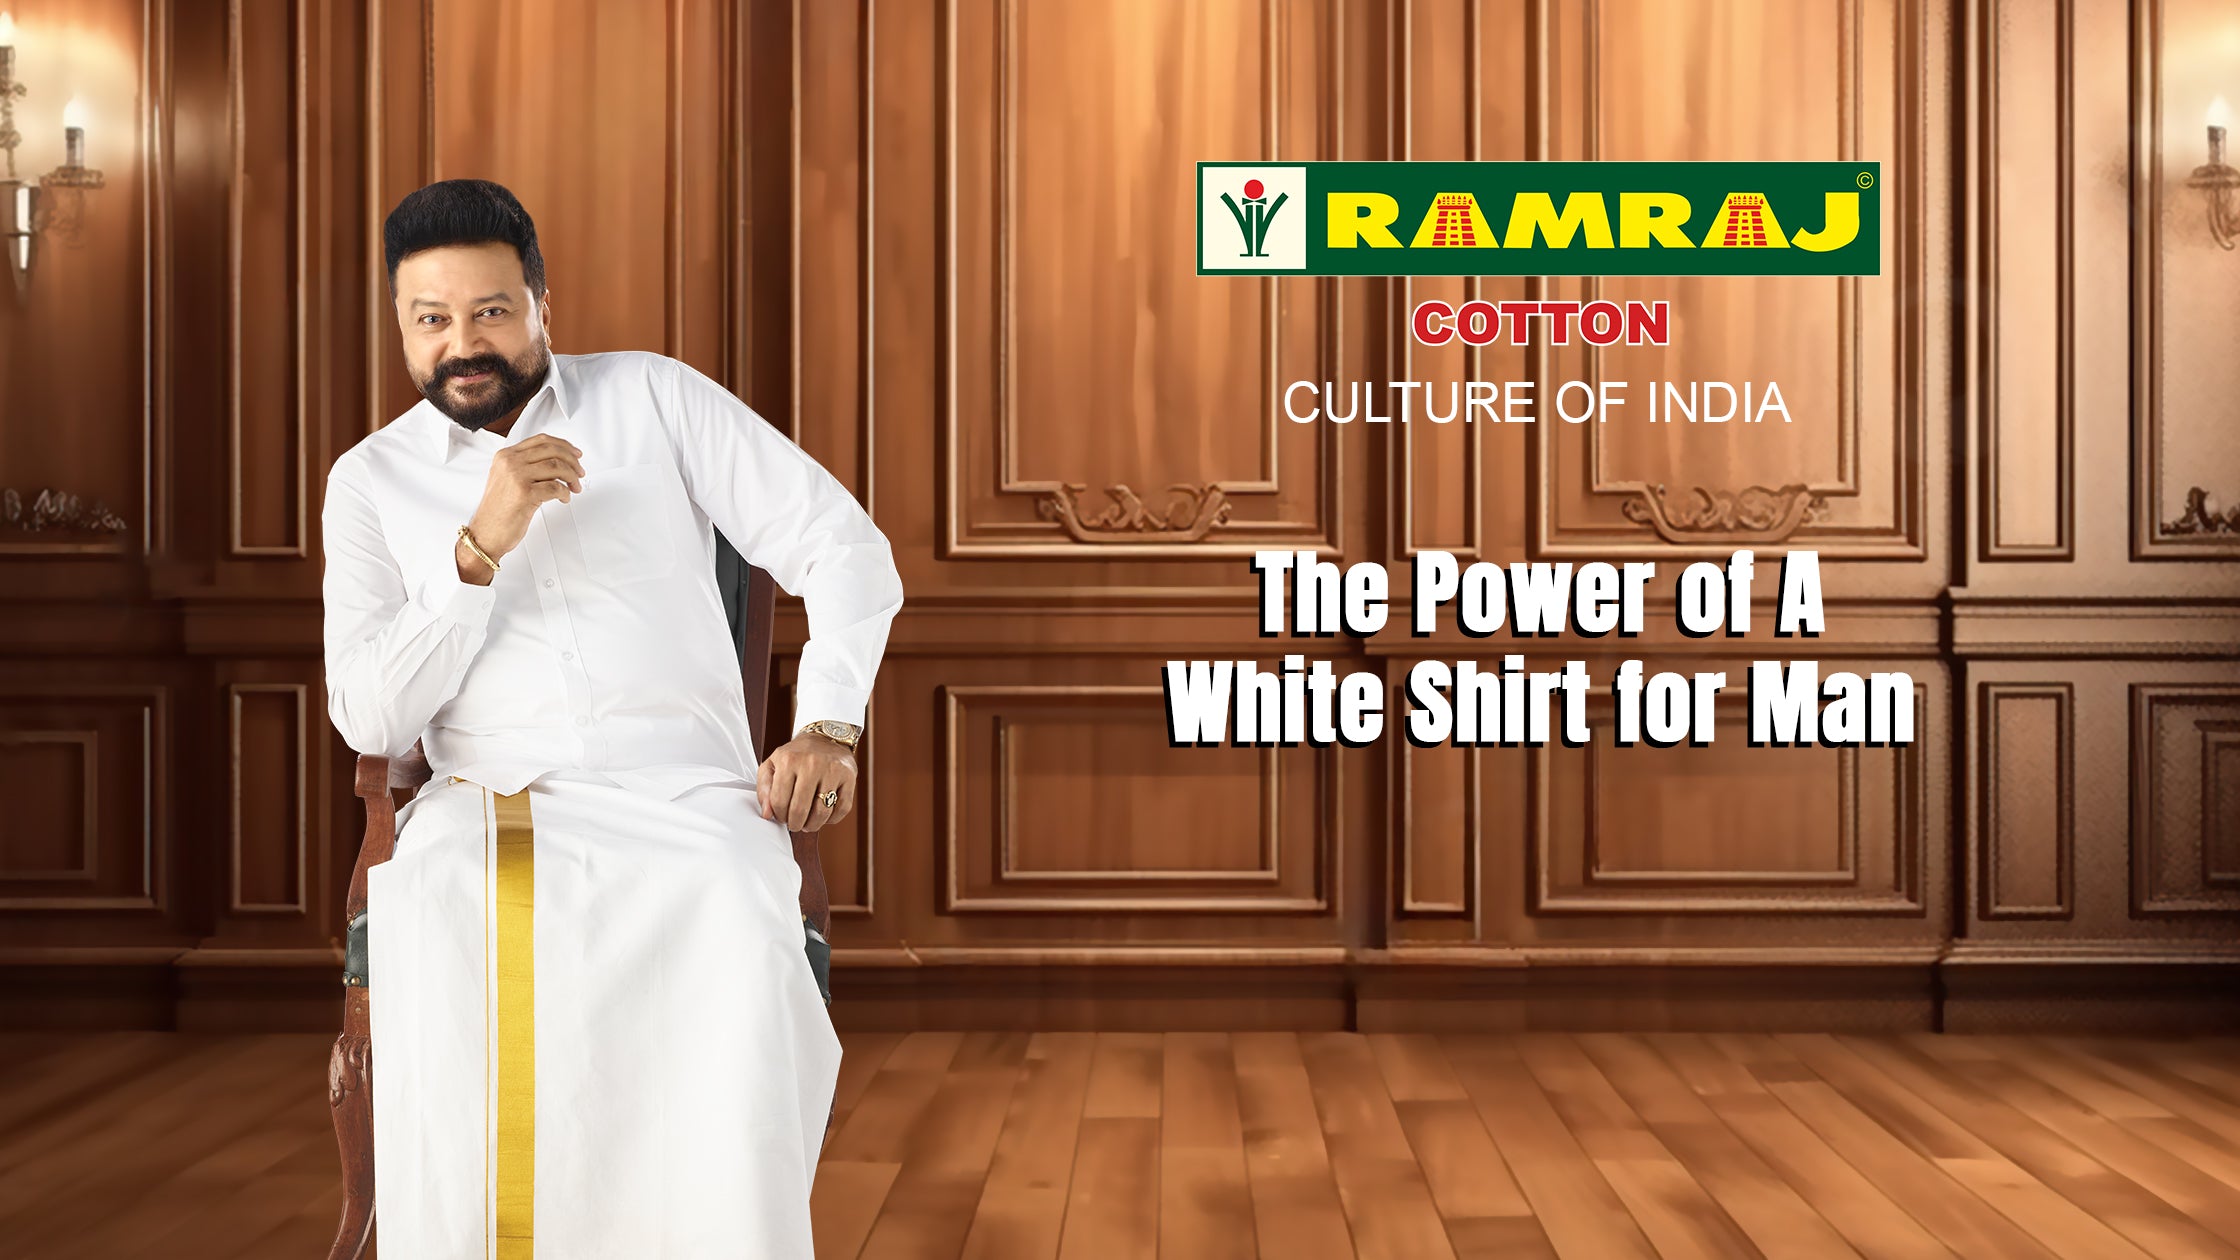 The Power Of A White Shirt for Man